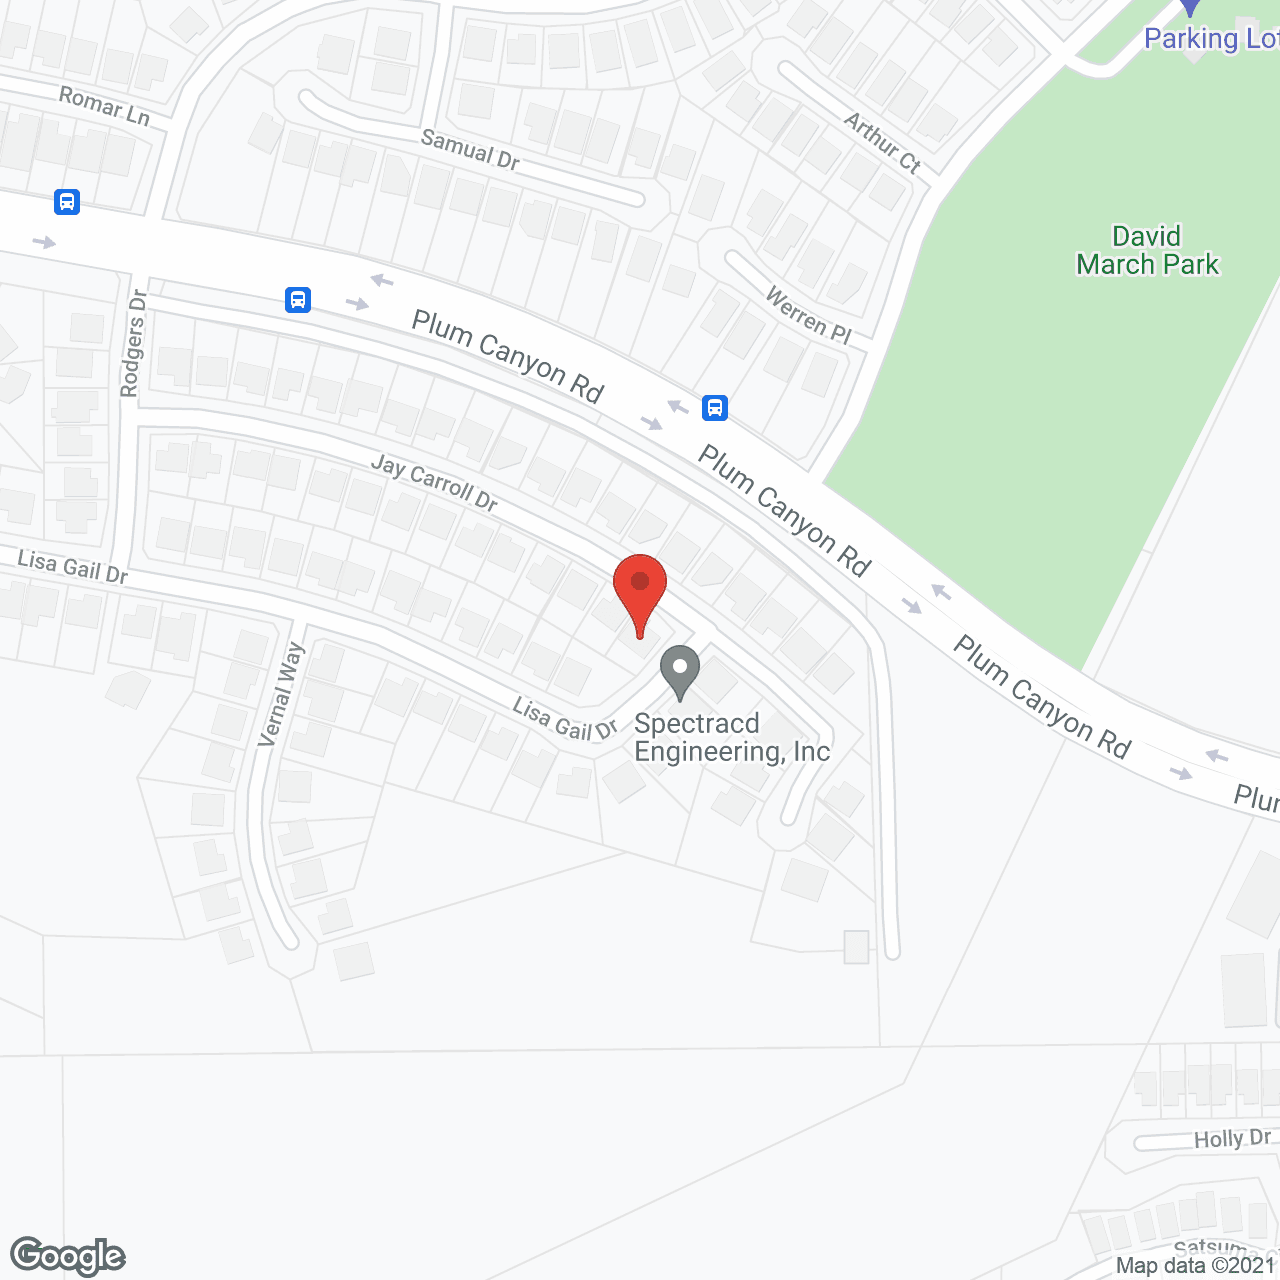 Jay Carroll Drive Family Care, Inc. in google map